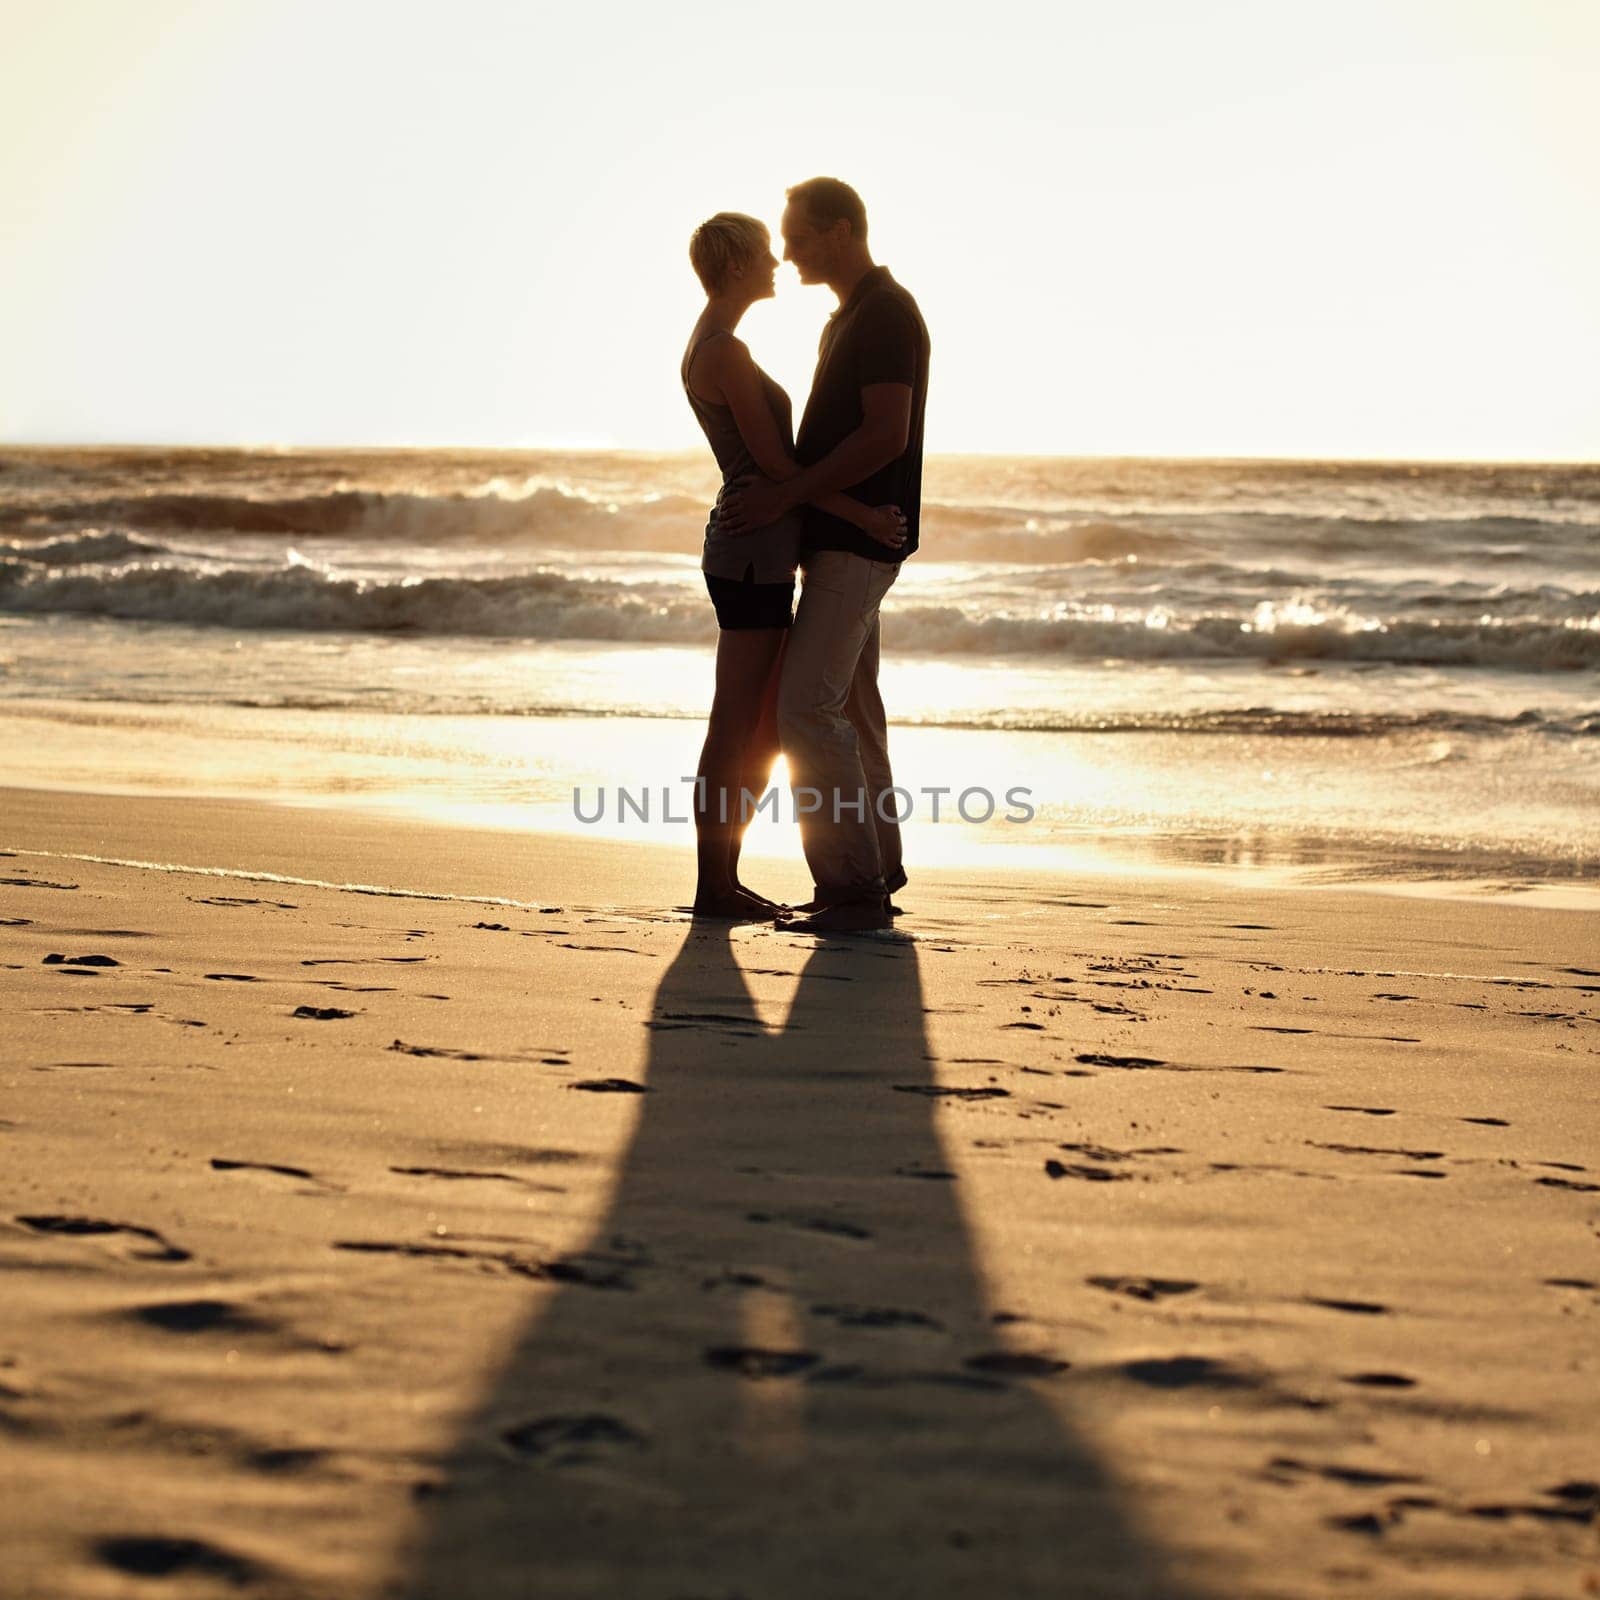 Silhouette, couple and kiss on beach at sunset for romantic, date and weekend getaway in Turkey. Woman, man or people in love with hug for walk, bonding or together in caring happy relationship.